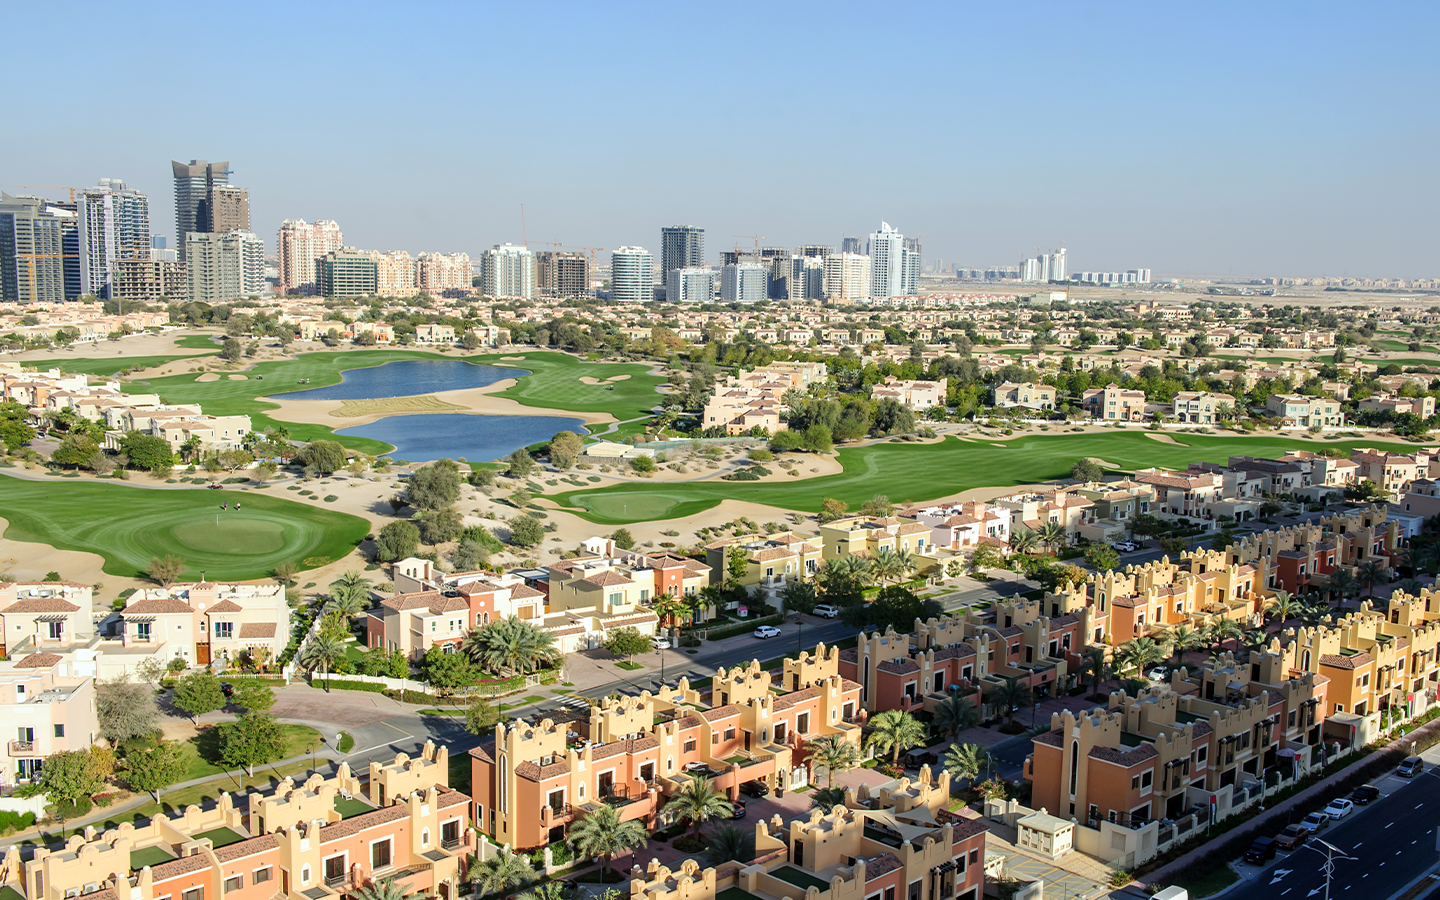 Dubai sports city is among the Popular areas to rent apartments for a family in dubai 